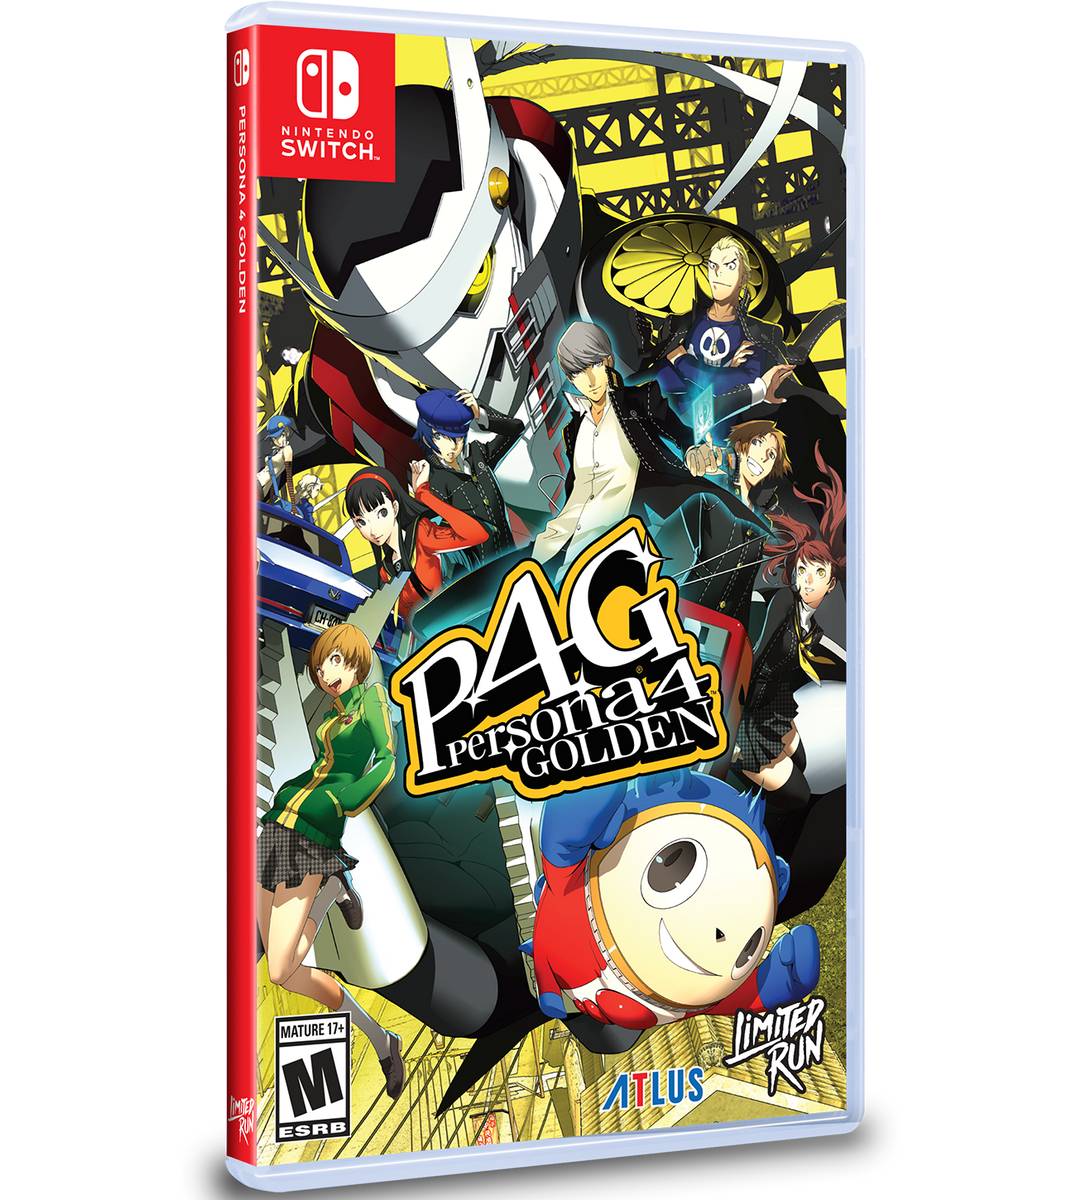 Switch Limited Run #214: Persona 4 Golden – Limited Run Games